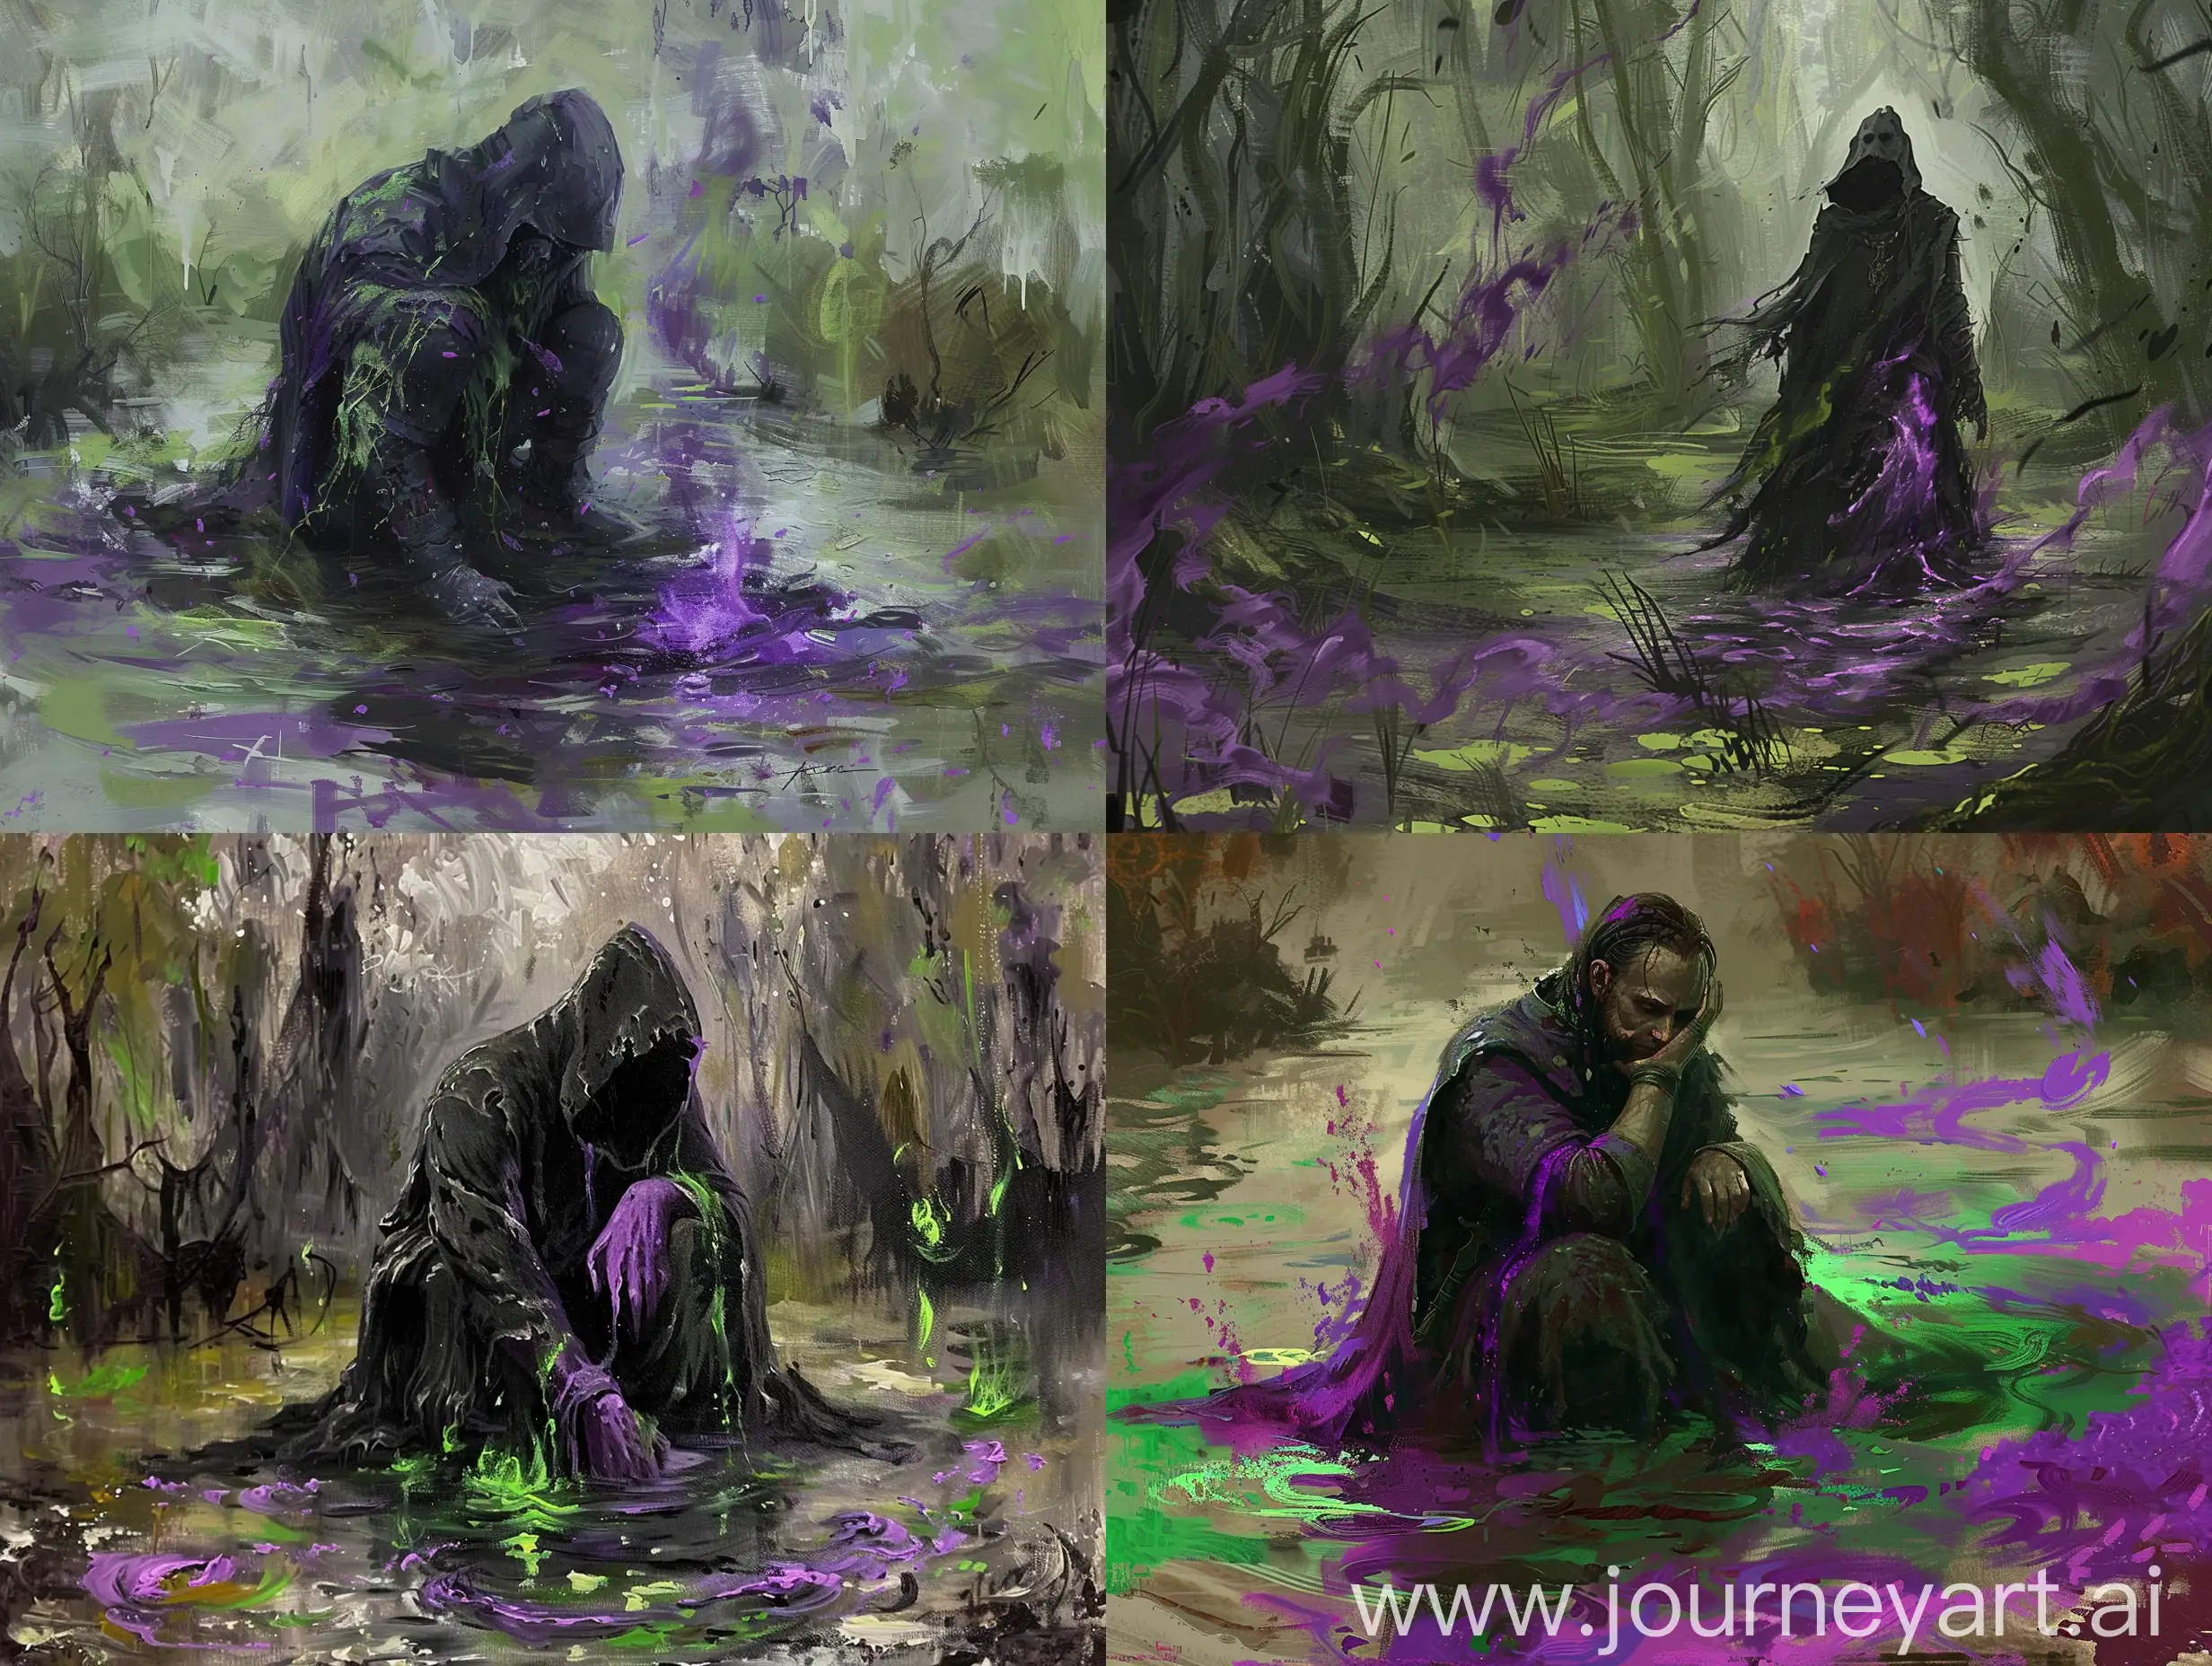 dark warlock sulking through a swamp of death. purple and green death magic emanates from him.
In the art style of Terese Nielsen oil painting.